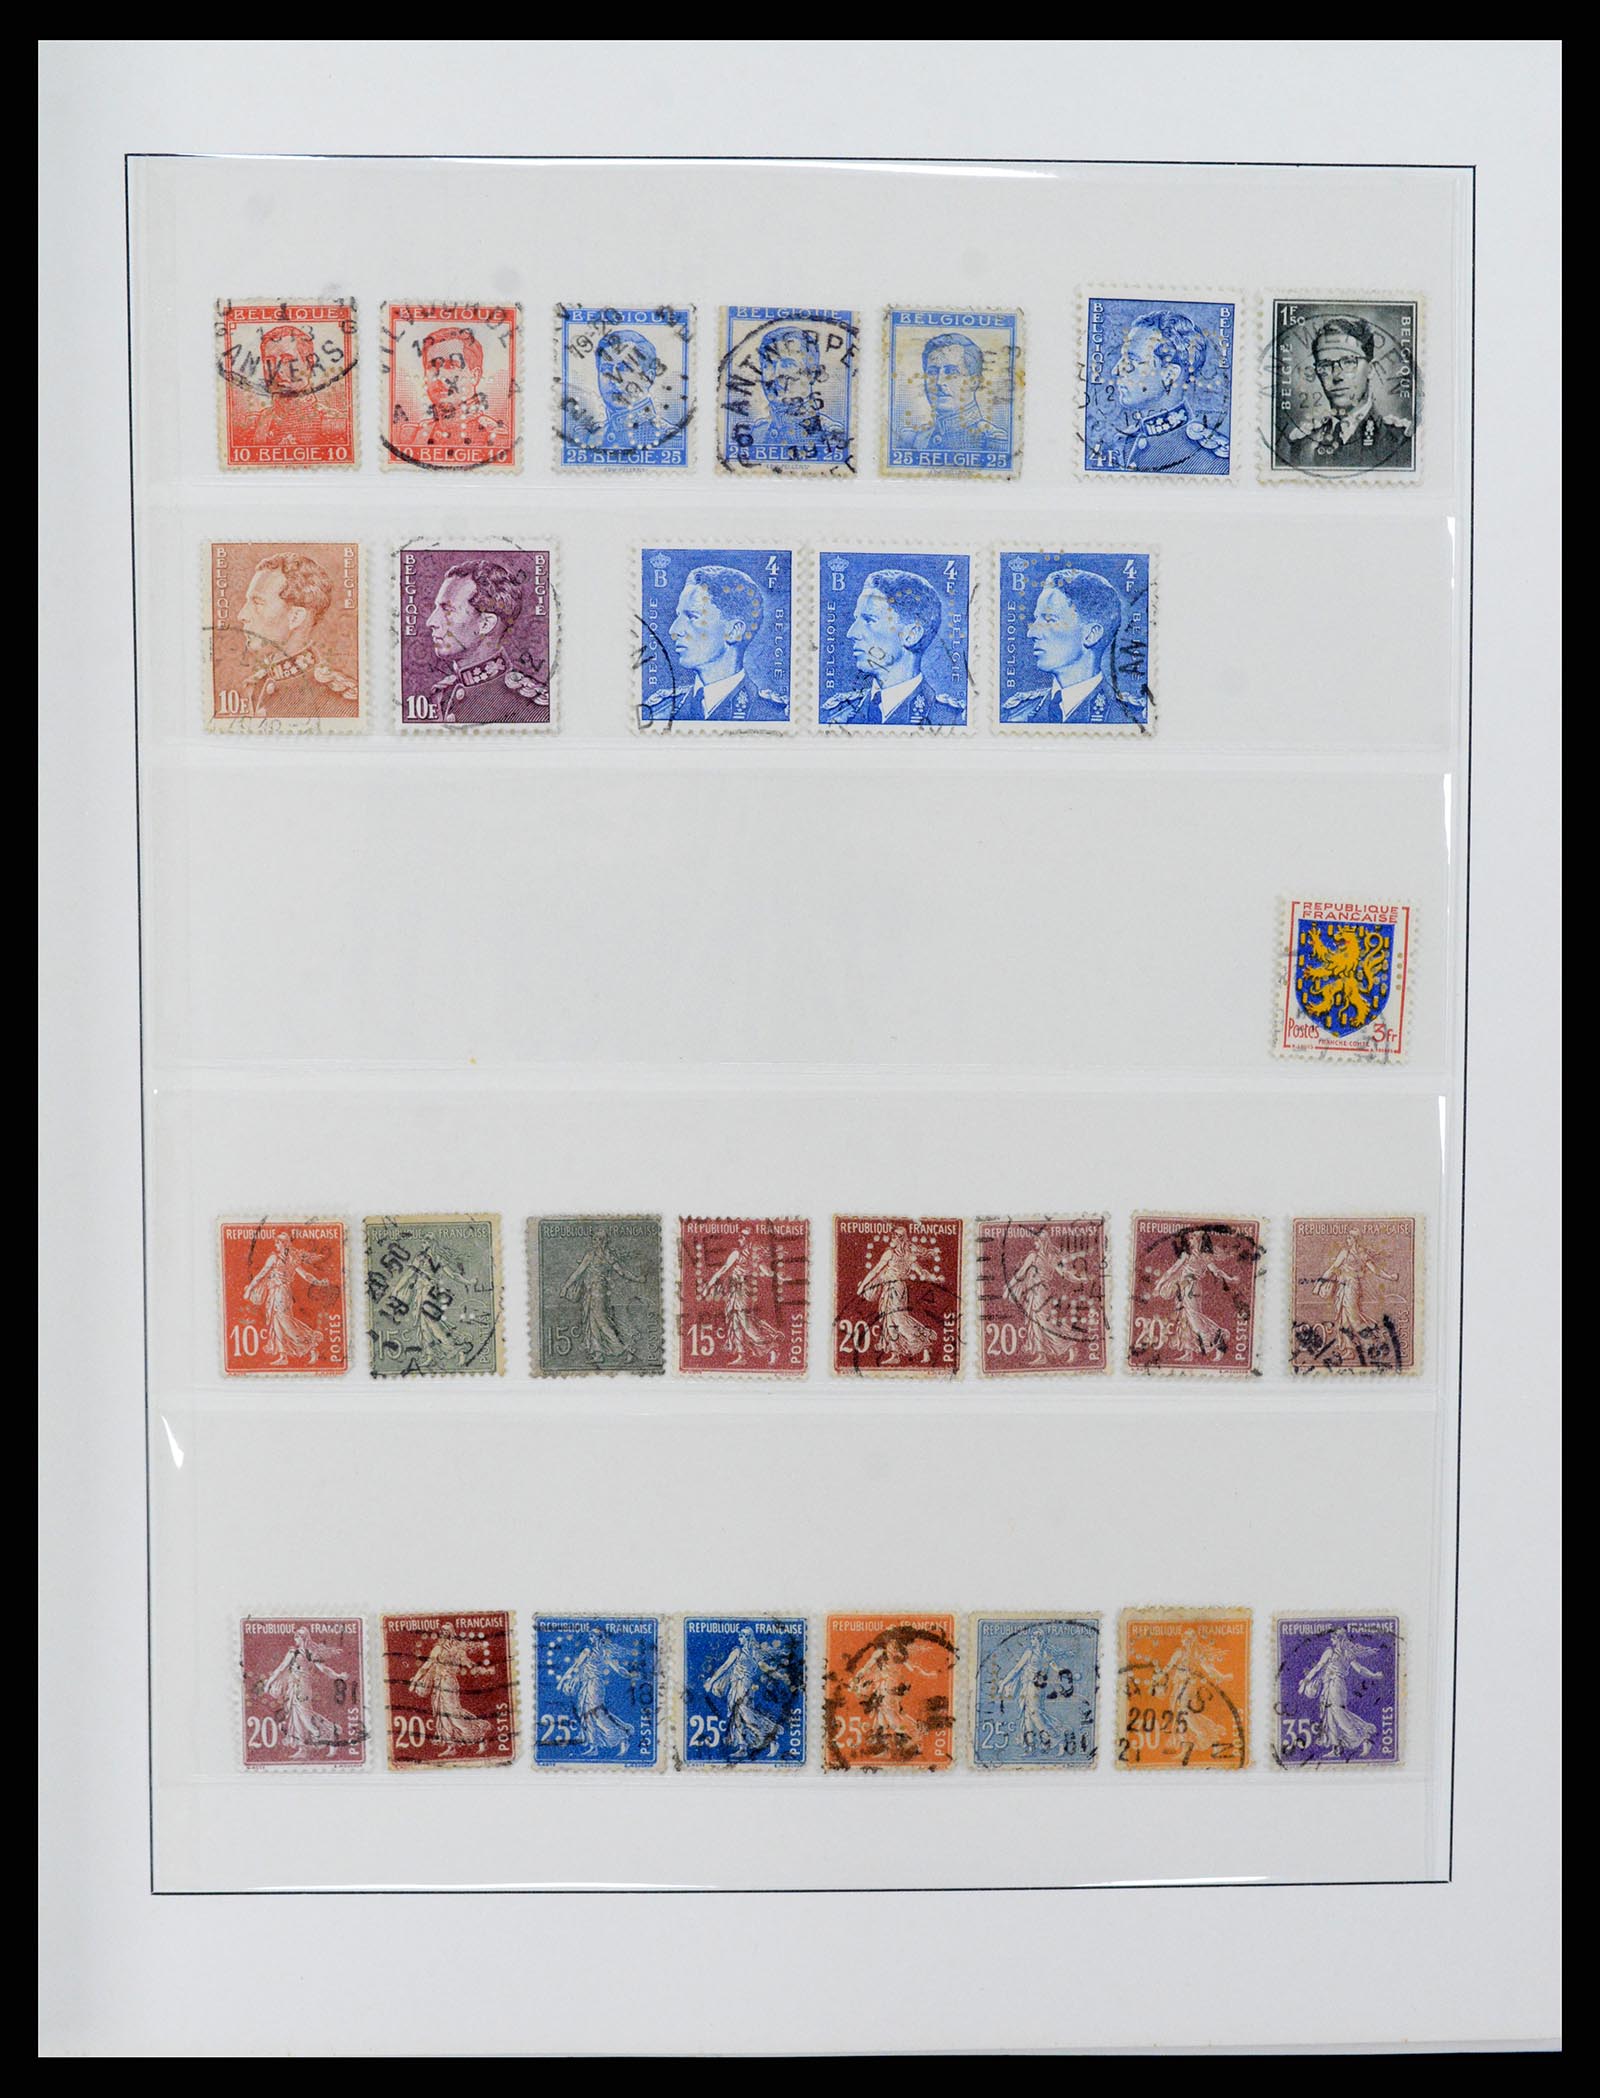 37317 029 - Stamp collection 37317 World perfins 1880-1960.